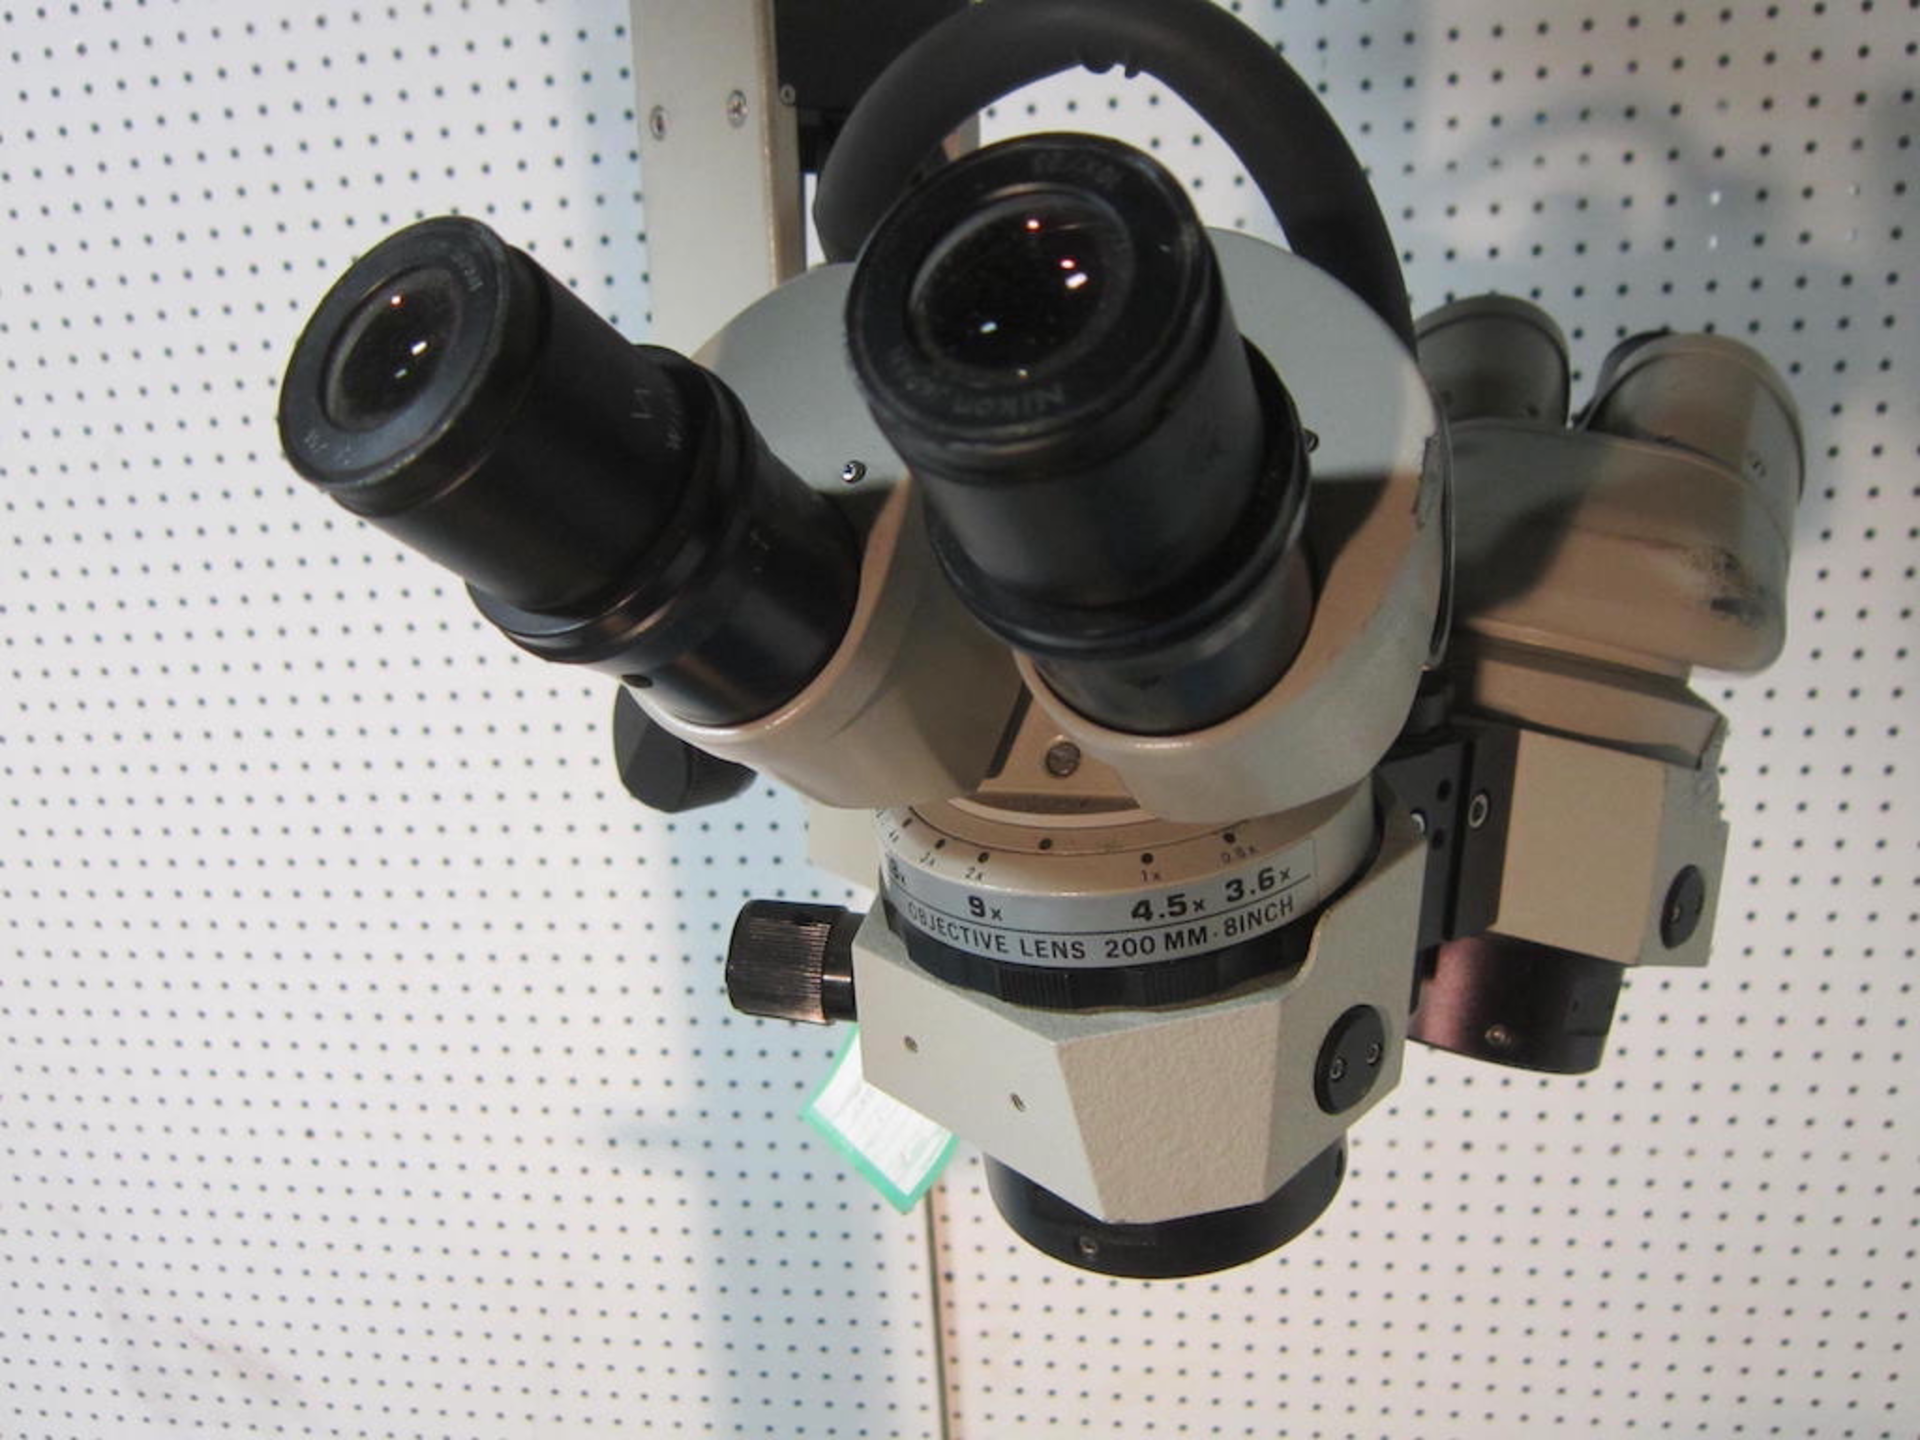 Weck Surgical Systems Microscope 1402 B12 with Light, Object Lens 200mm with Foot Switch - Image 9 of 32